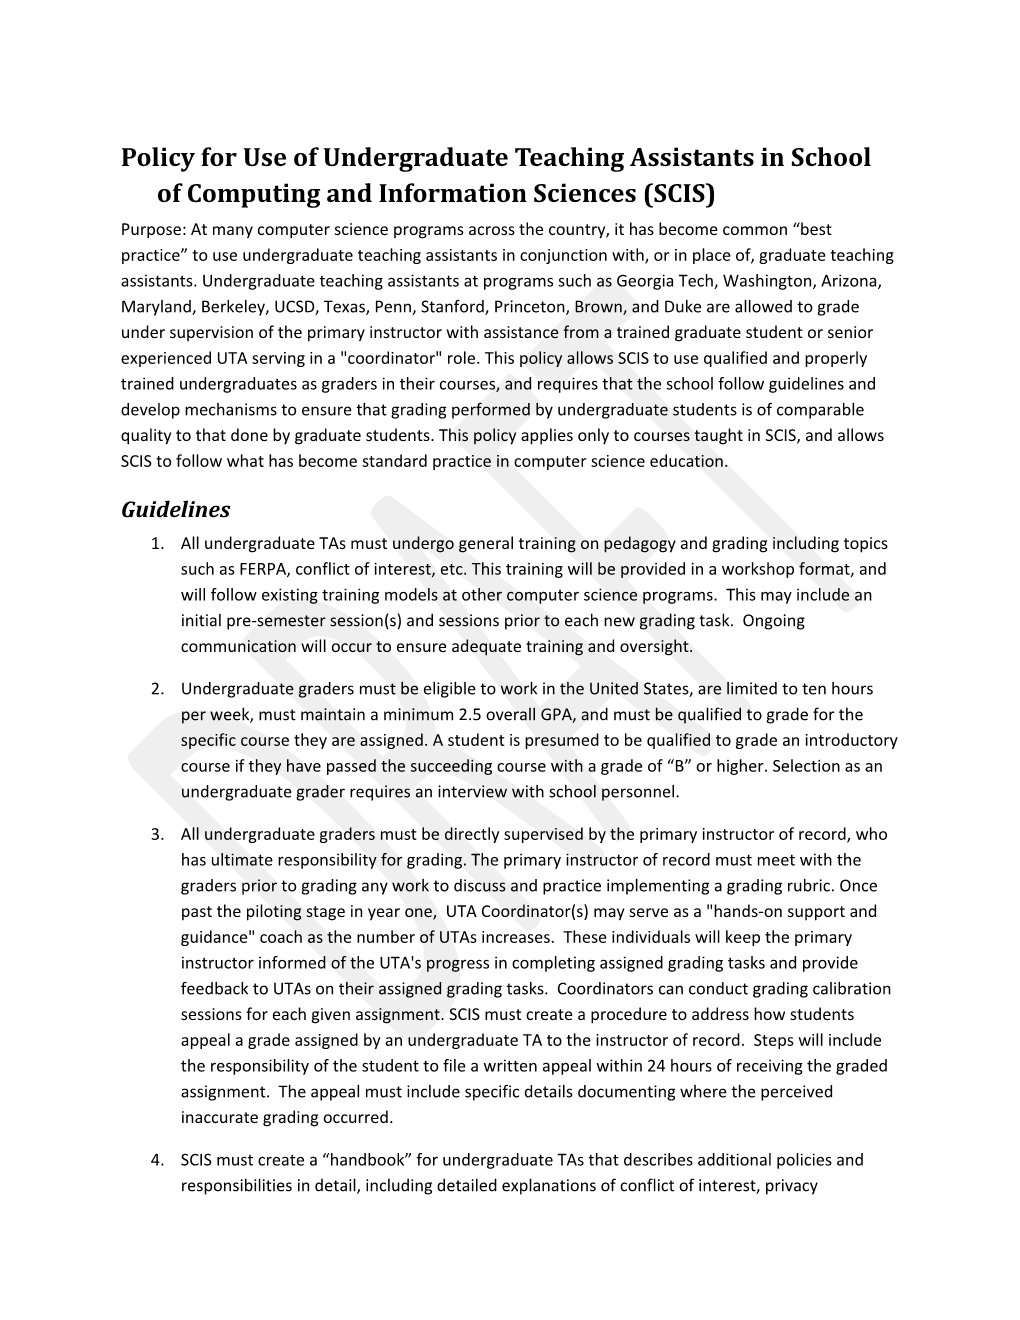 Policy for Use of Undergraduate Teaching Assistants in School of Computing and Information